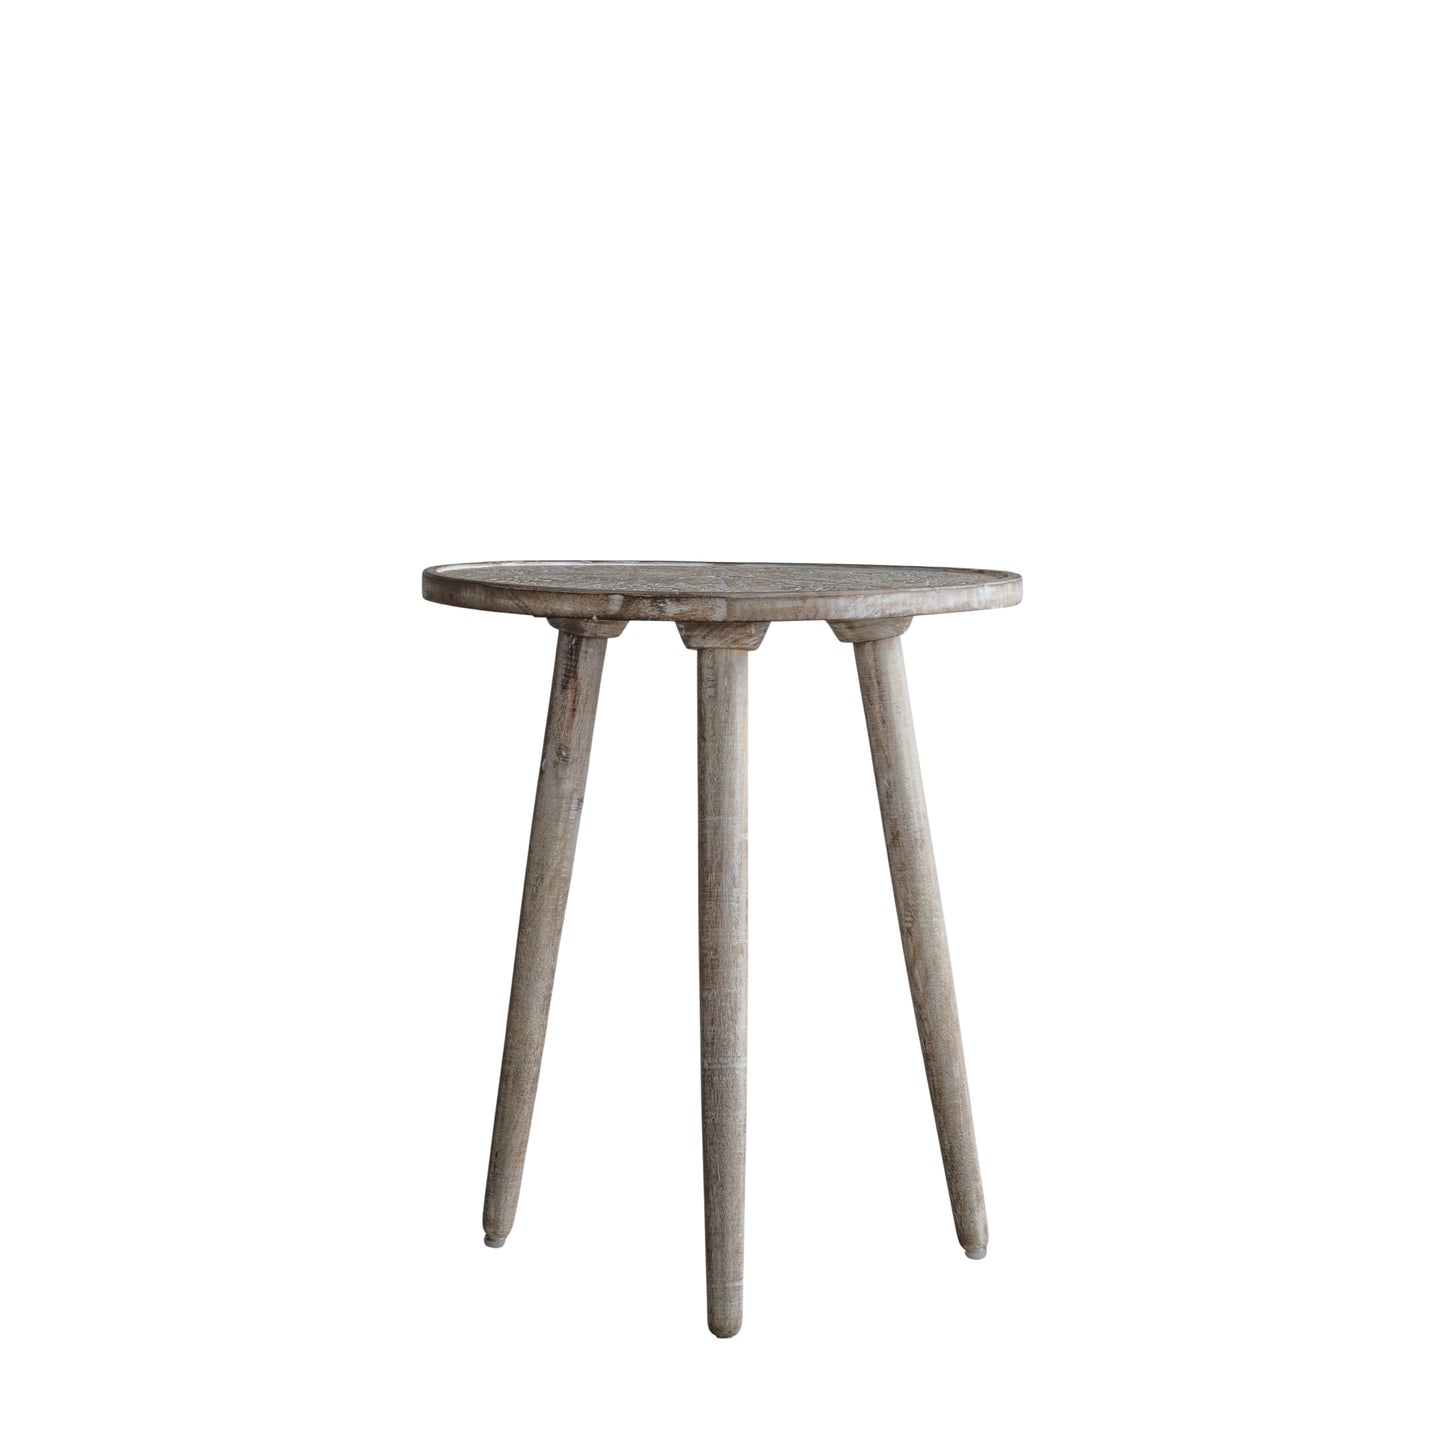 A stylish Home furniture piece, the Bantham Side Table, offered by Kikiathome.co.uk for interior decor.